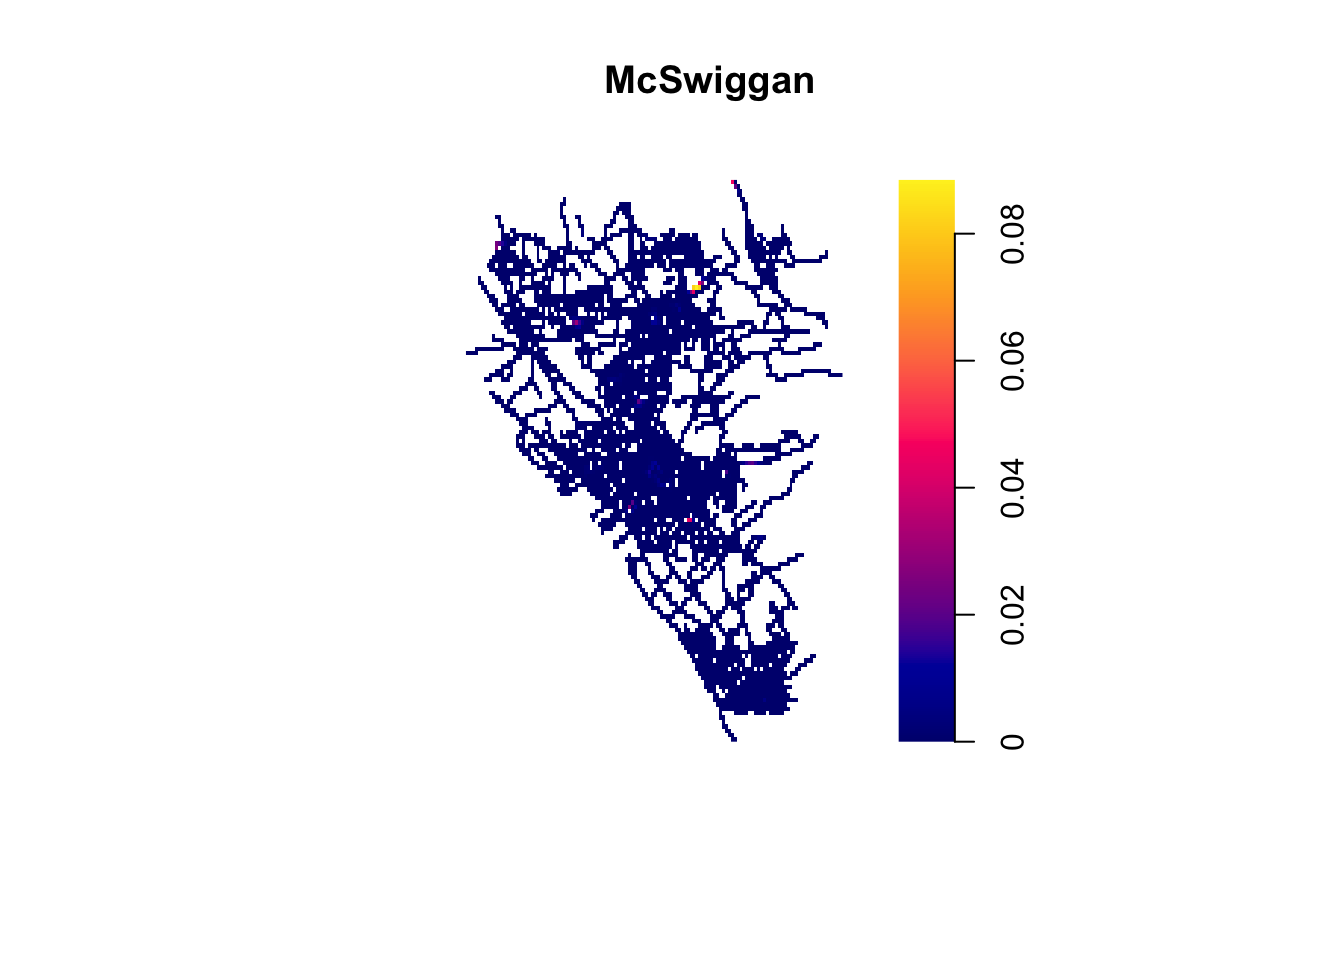 Like the previous figure, we have a shaded street map of Heswall titled 'McSwiggan', with a similar legend. Amidst the dark blue, a few areas of lighter blue appear, as well as several red to purple spots. One area towards the top right reaches yellow.